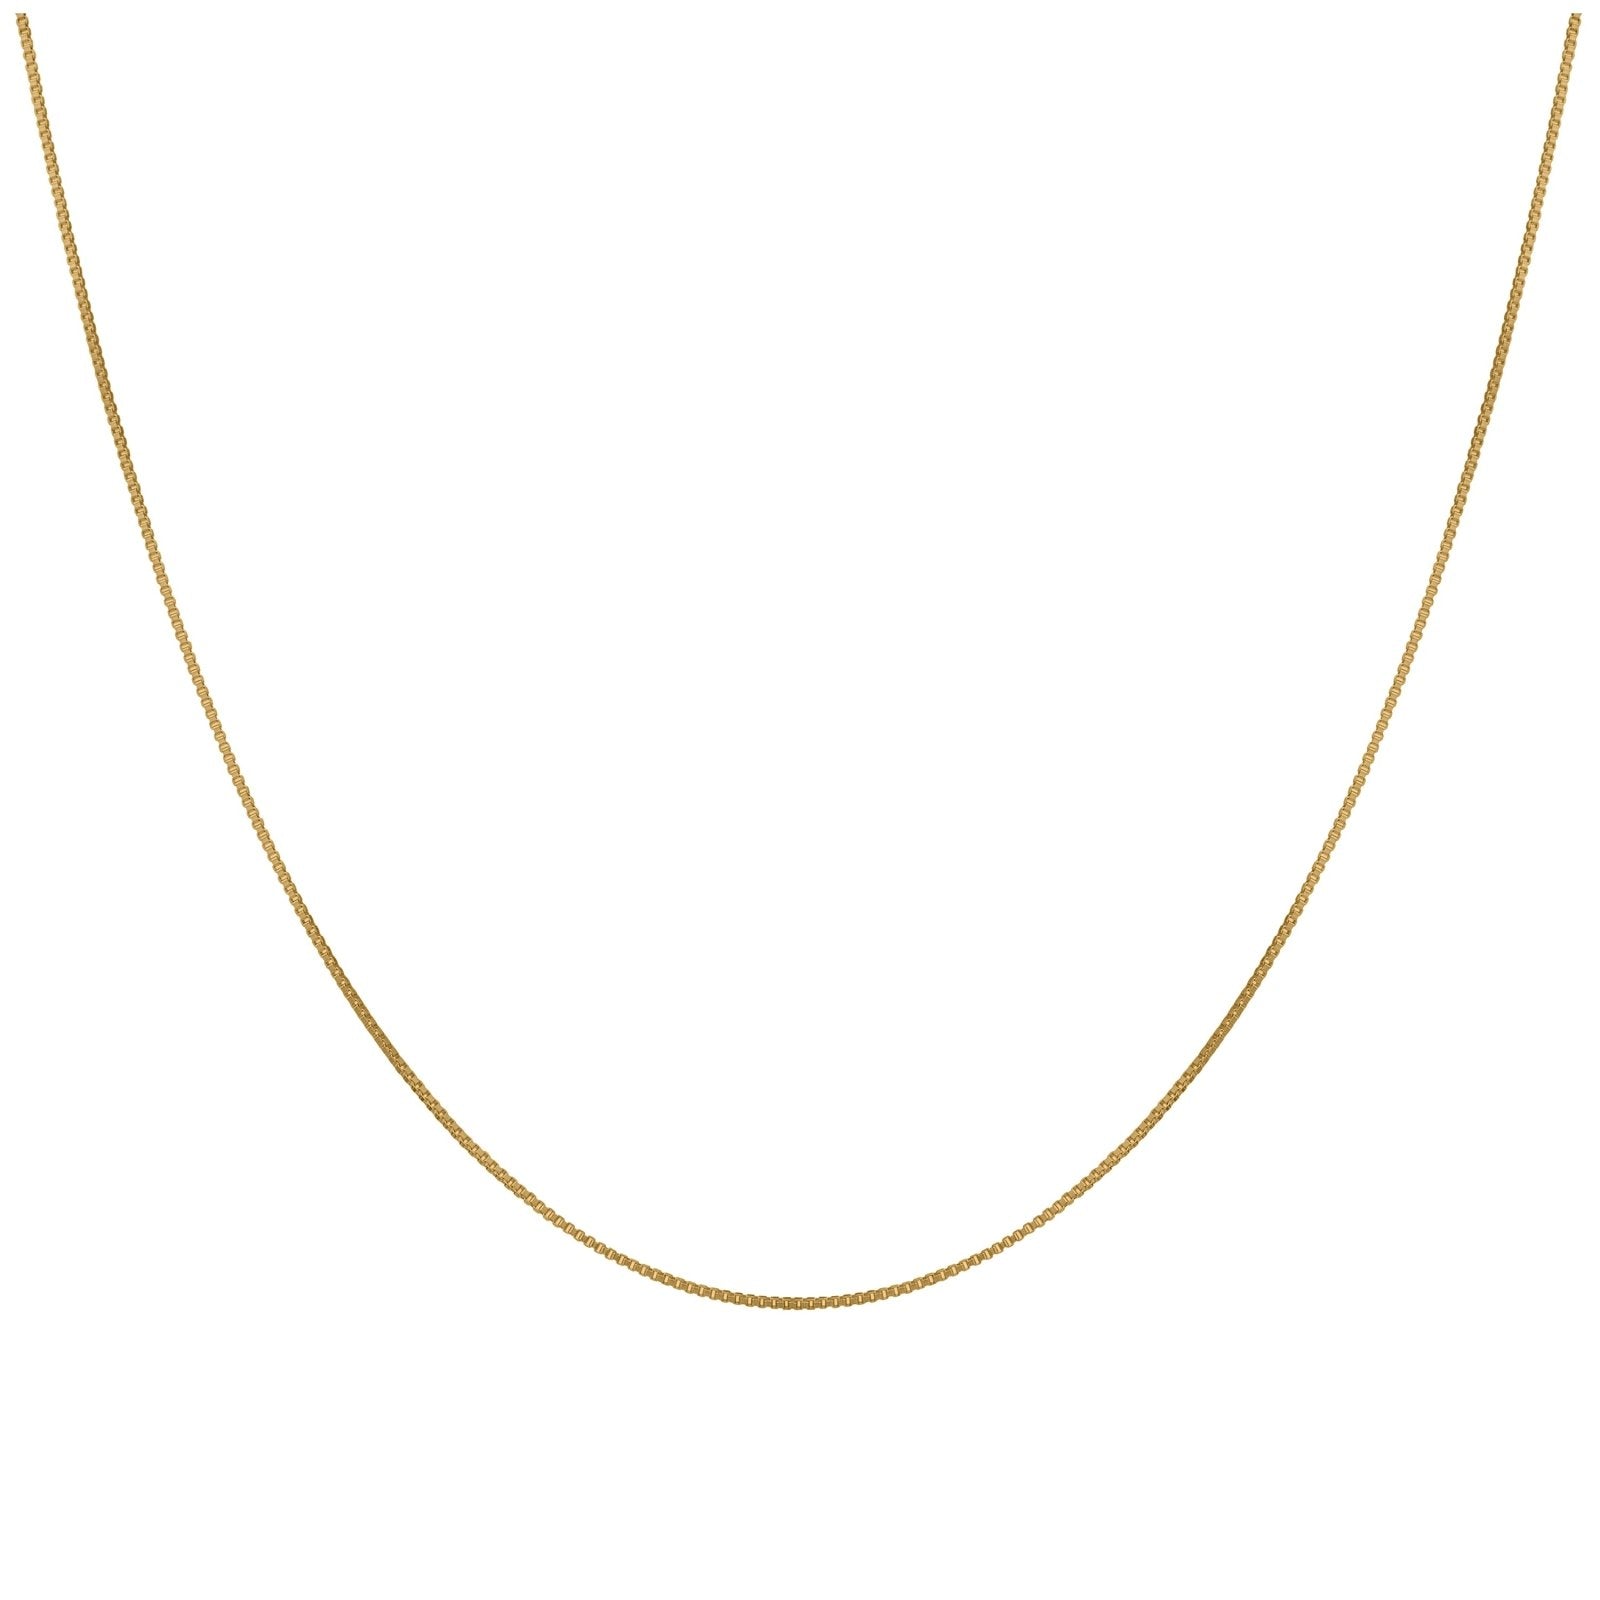 Gold Plated Sterling Silver Box Chain 16 Inches - jewellerybox